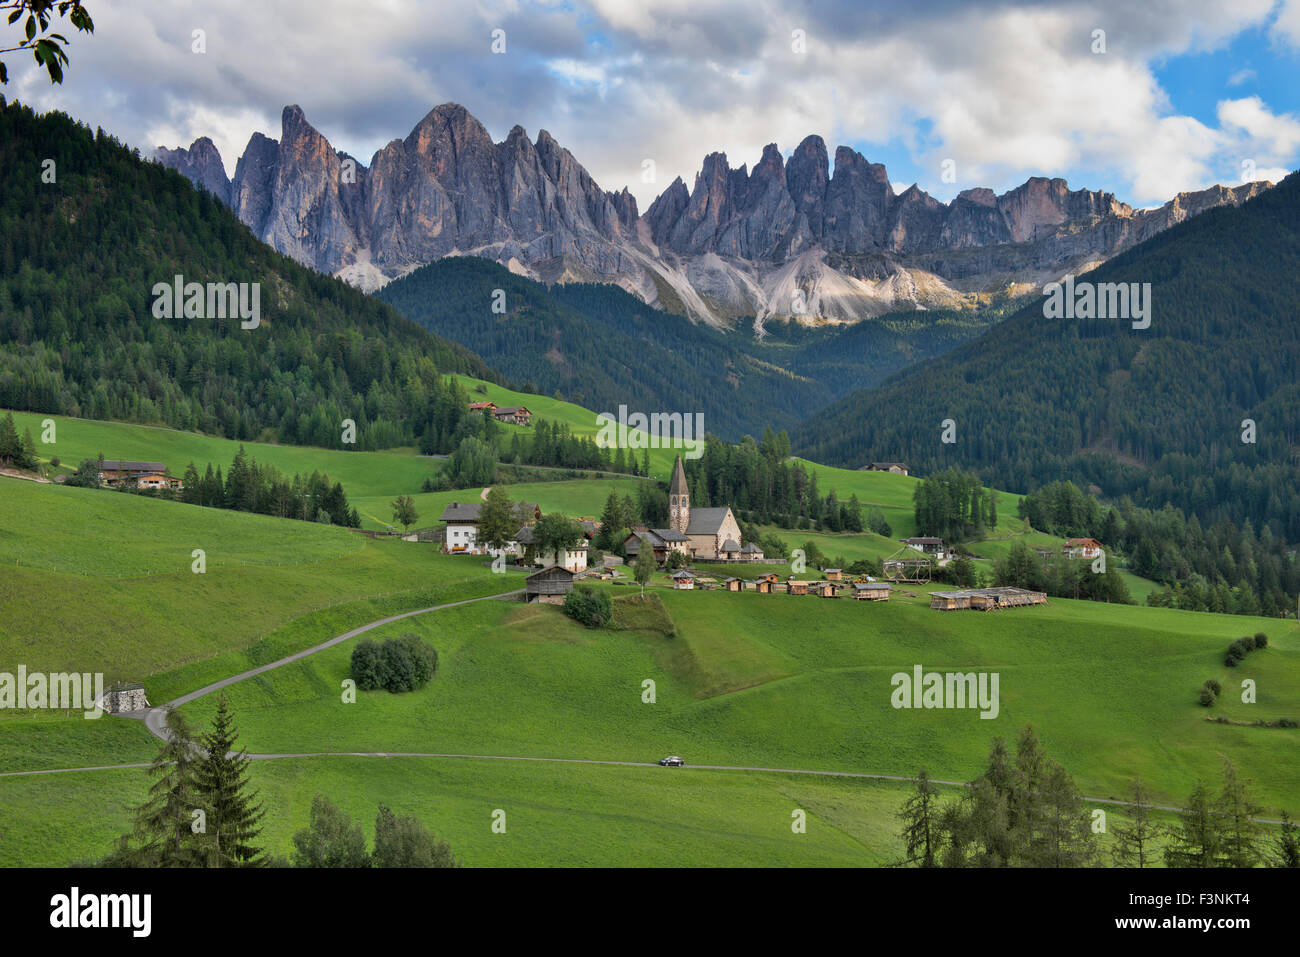 The beautiful Santa Maddalena and Val di Funes under the magnificent Odle Range in the Puez Odle Nature Park, Dolomites, Italy Stock Photo